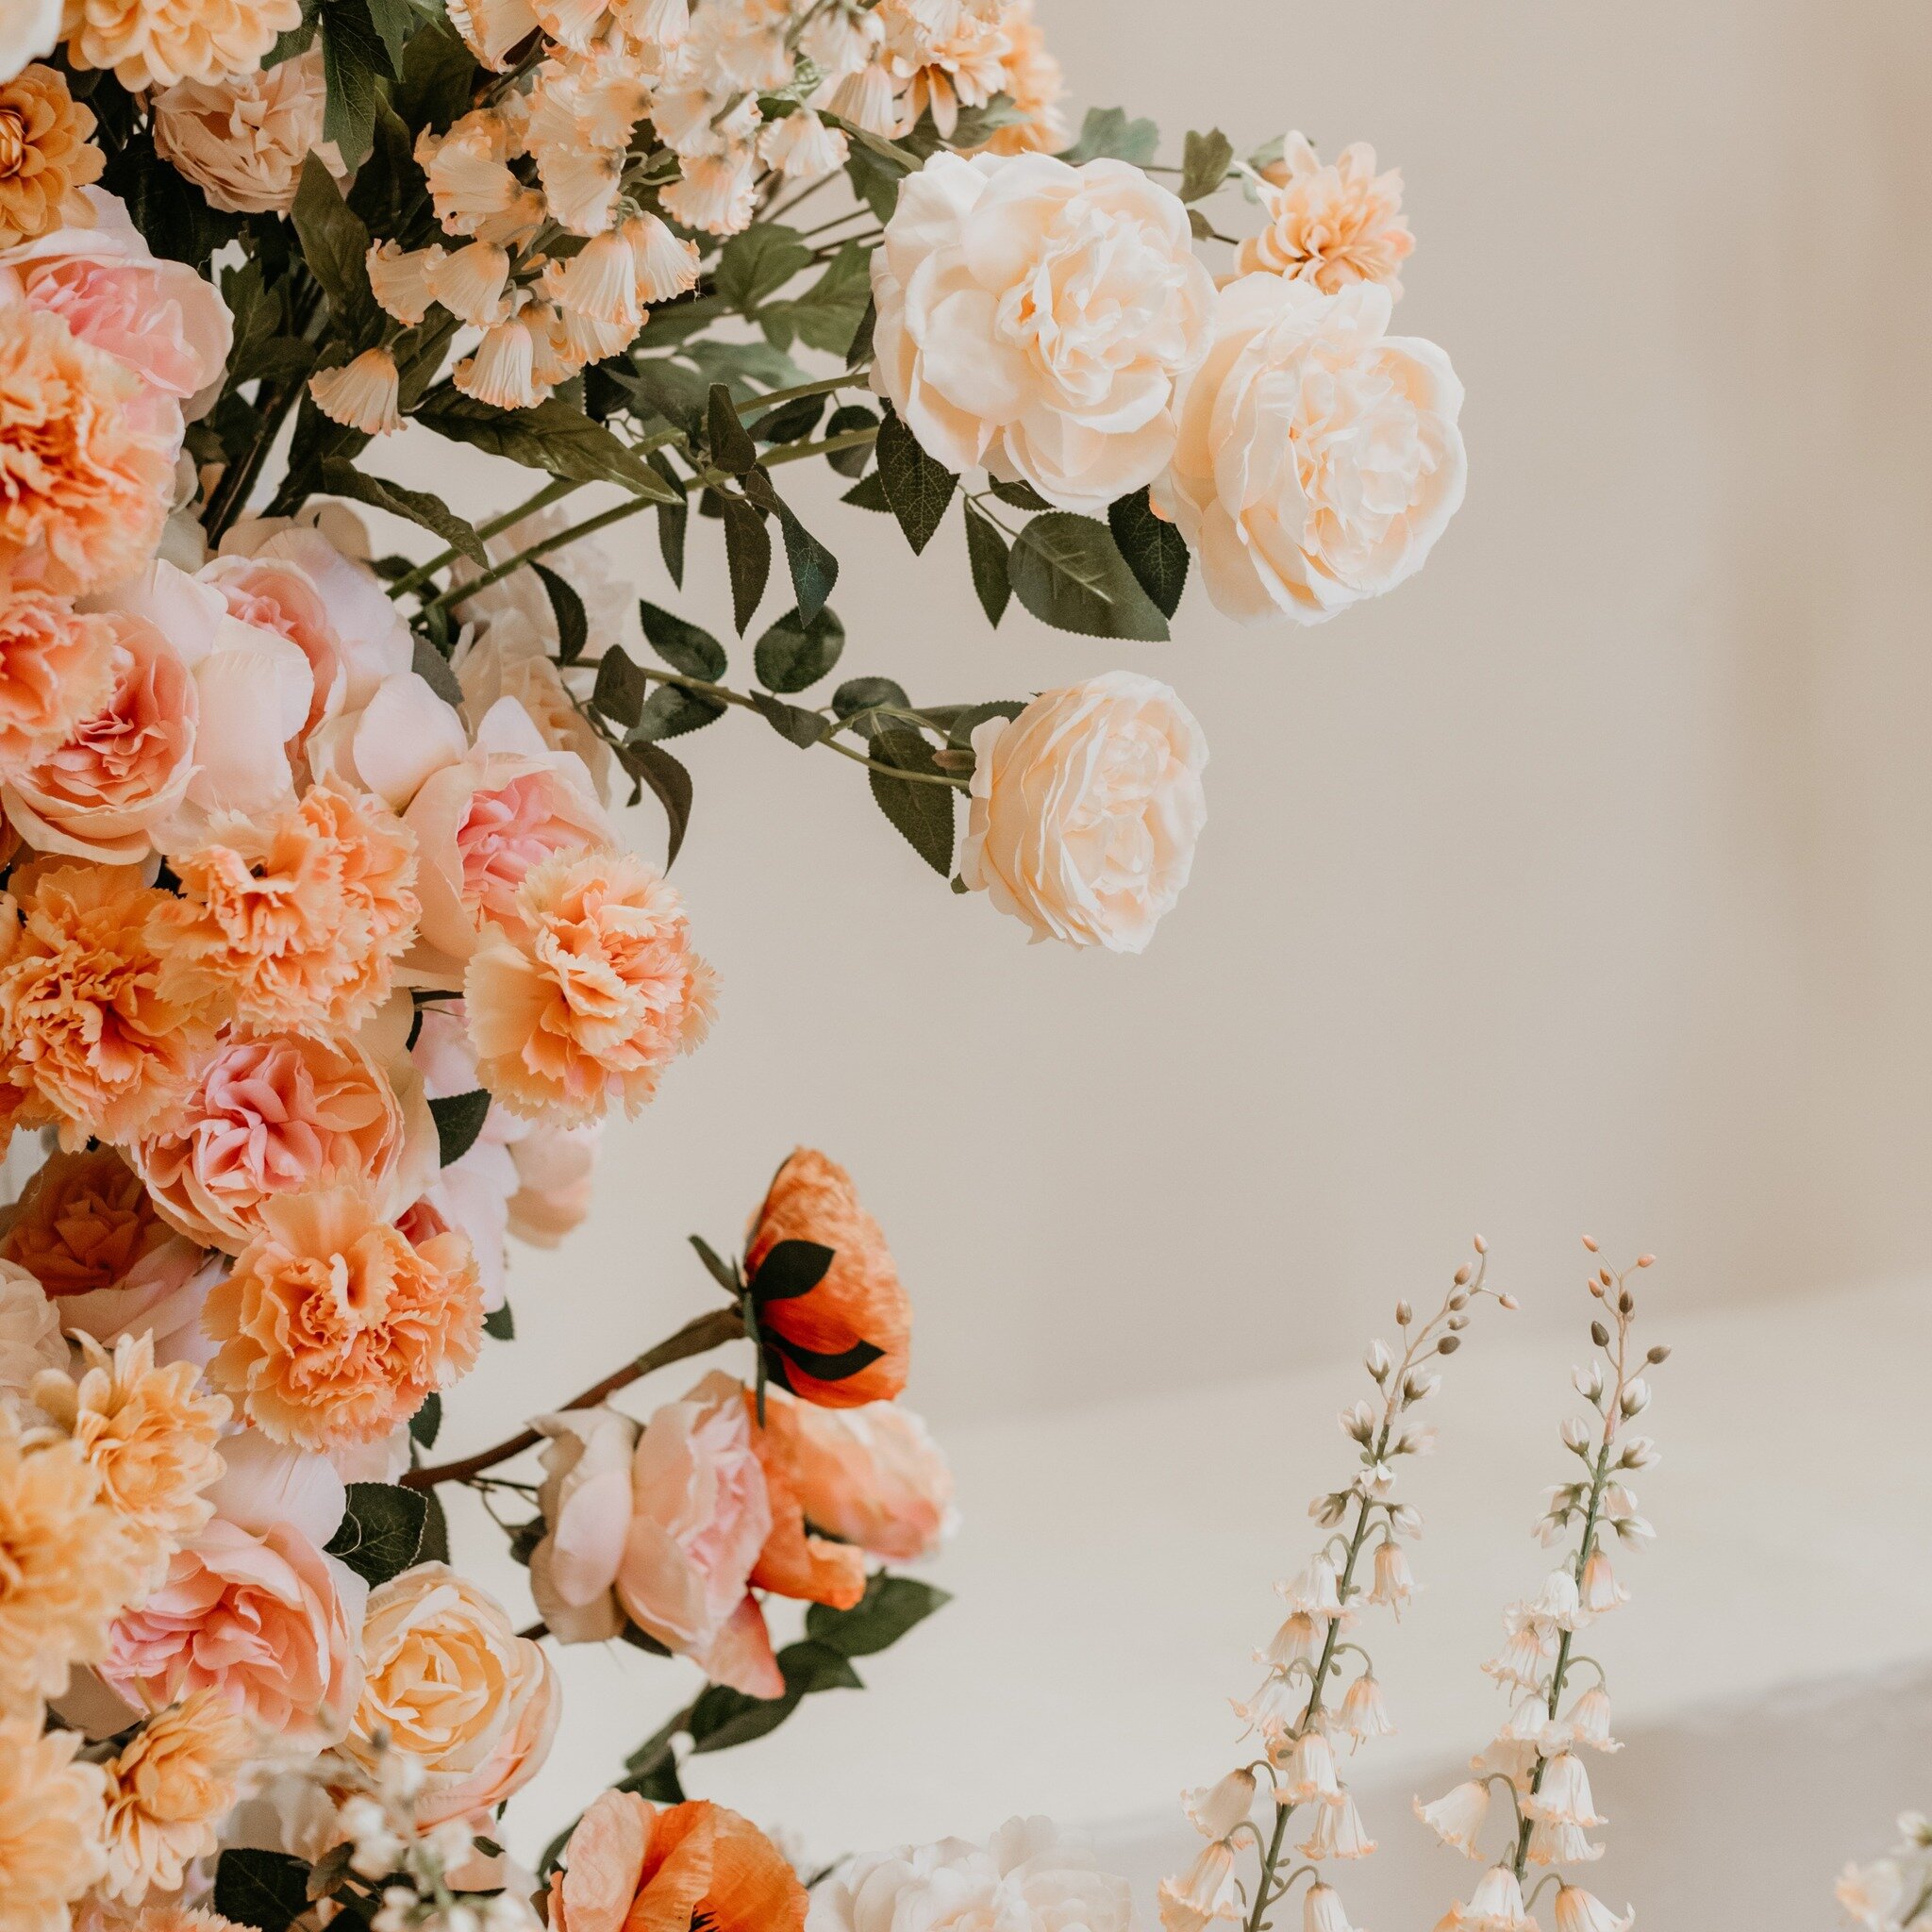 &ldquo;Step into a world of timeless elegance with the warmth of Pantone&rsquo;s Color of the Year, Peach Fuzz. 🍑✨ Let love blossom amidst the delicate hues of peaches and roses under an enchanting archway. 💖 Your dream wedding awaits, where every 